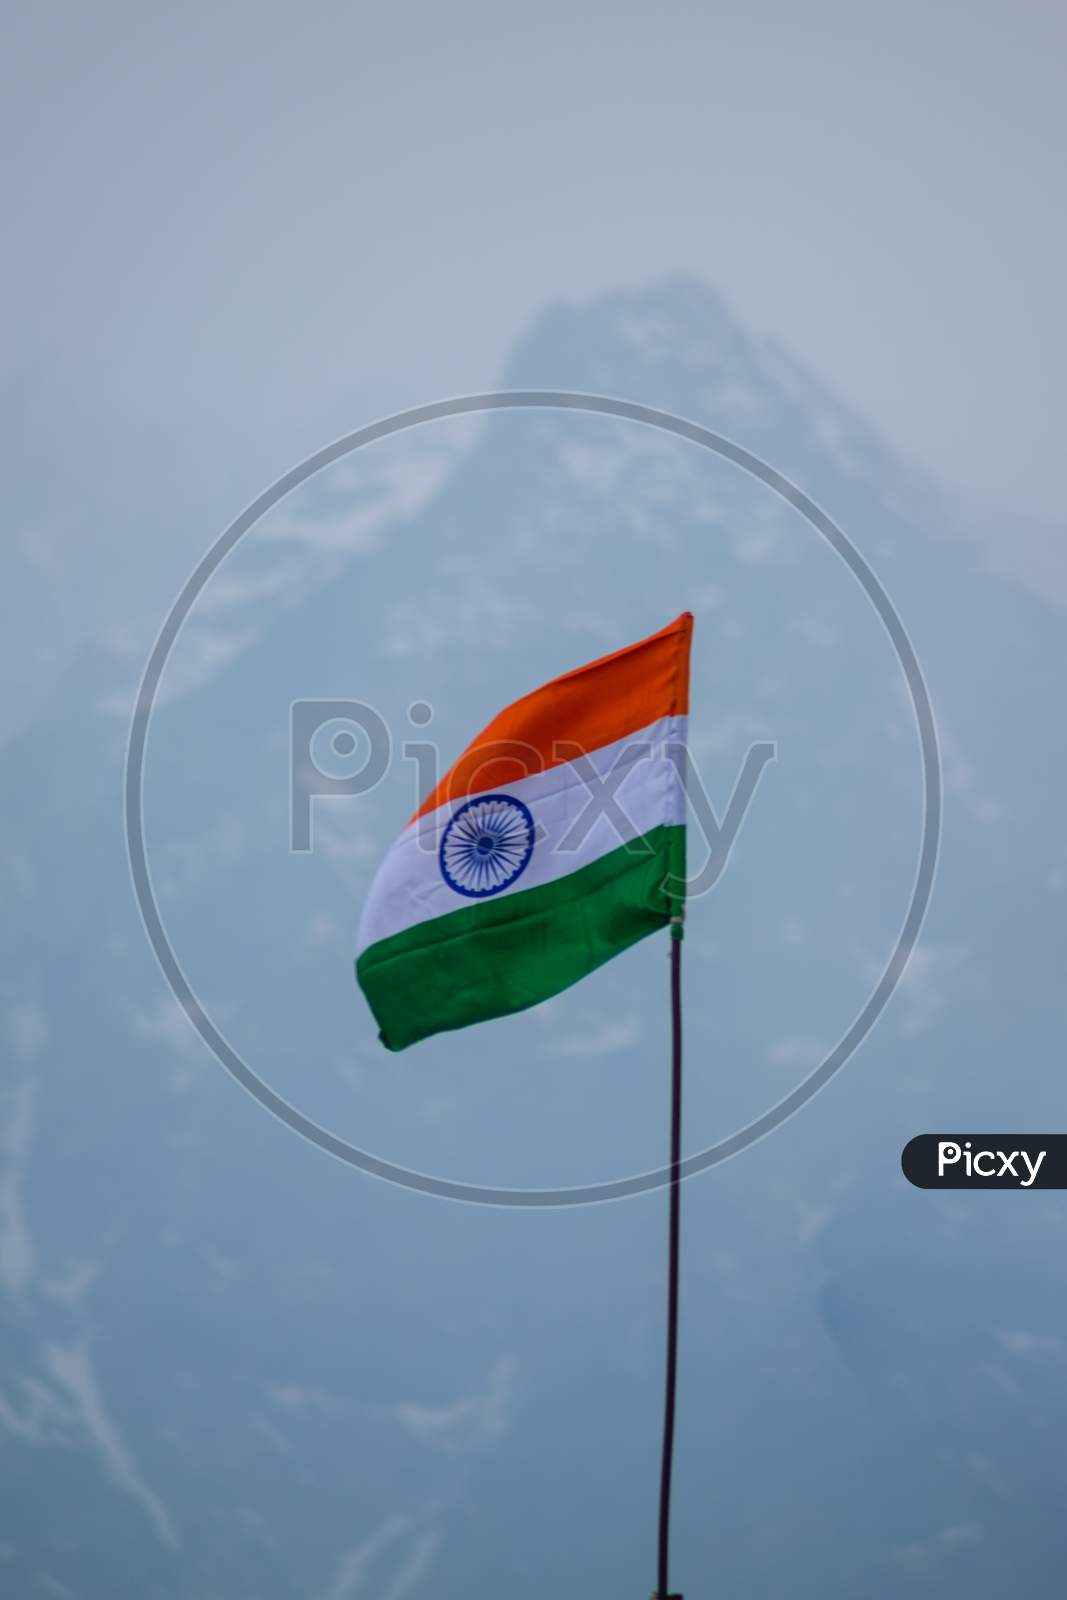 Tricolor Flag In The Himalayas Being Waves By The Winds